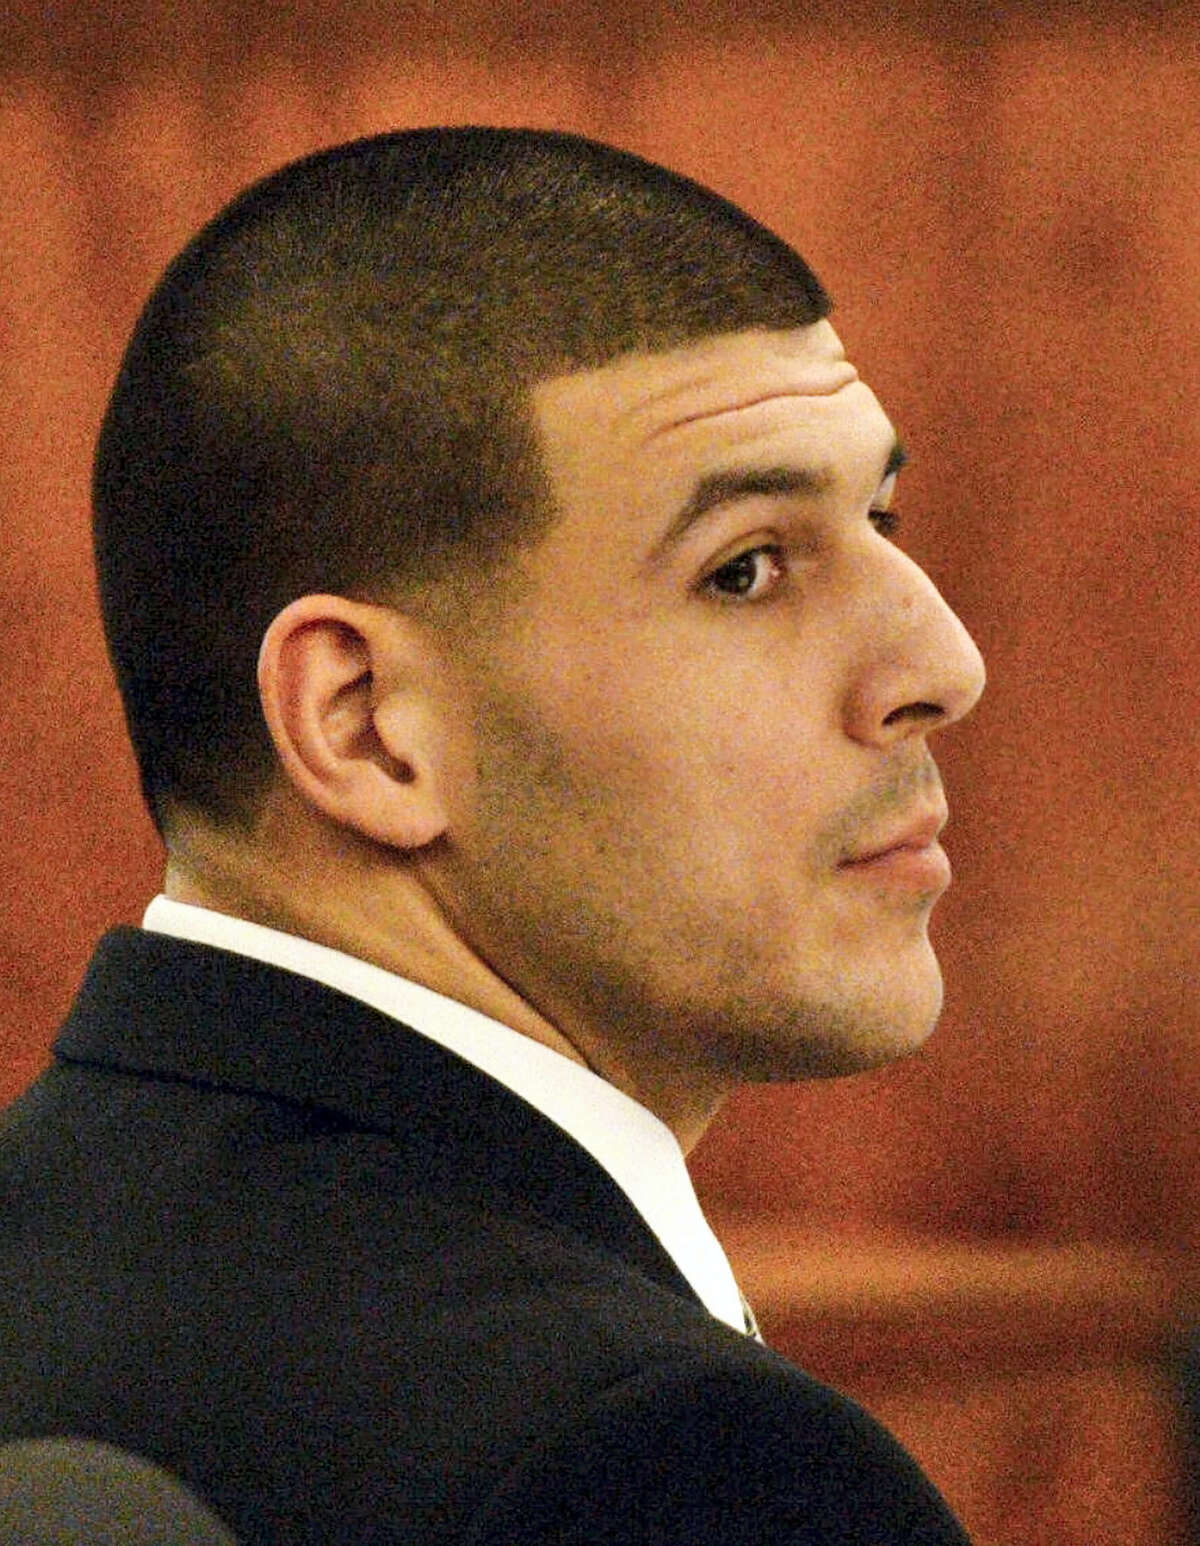 In this file photo, former New England Patriots football player Aaron Hernandez listens to testimony during his murder trial, Friday, Jan. 30, 2015, in Fall River, Mass.